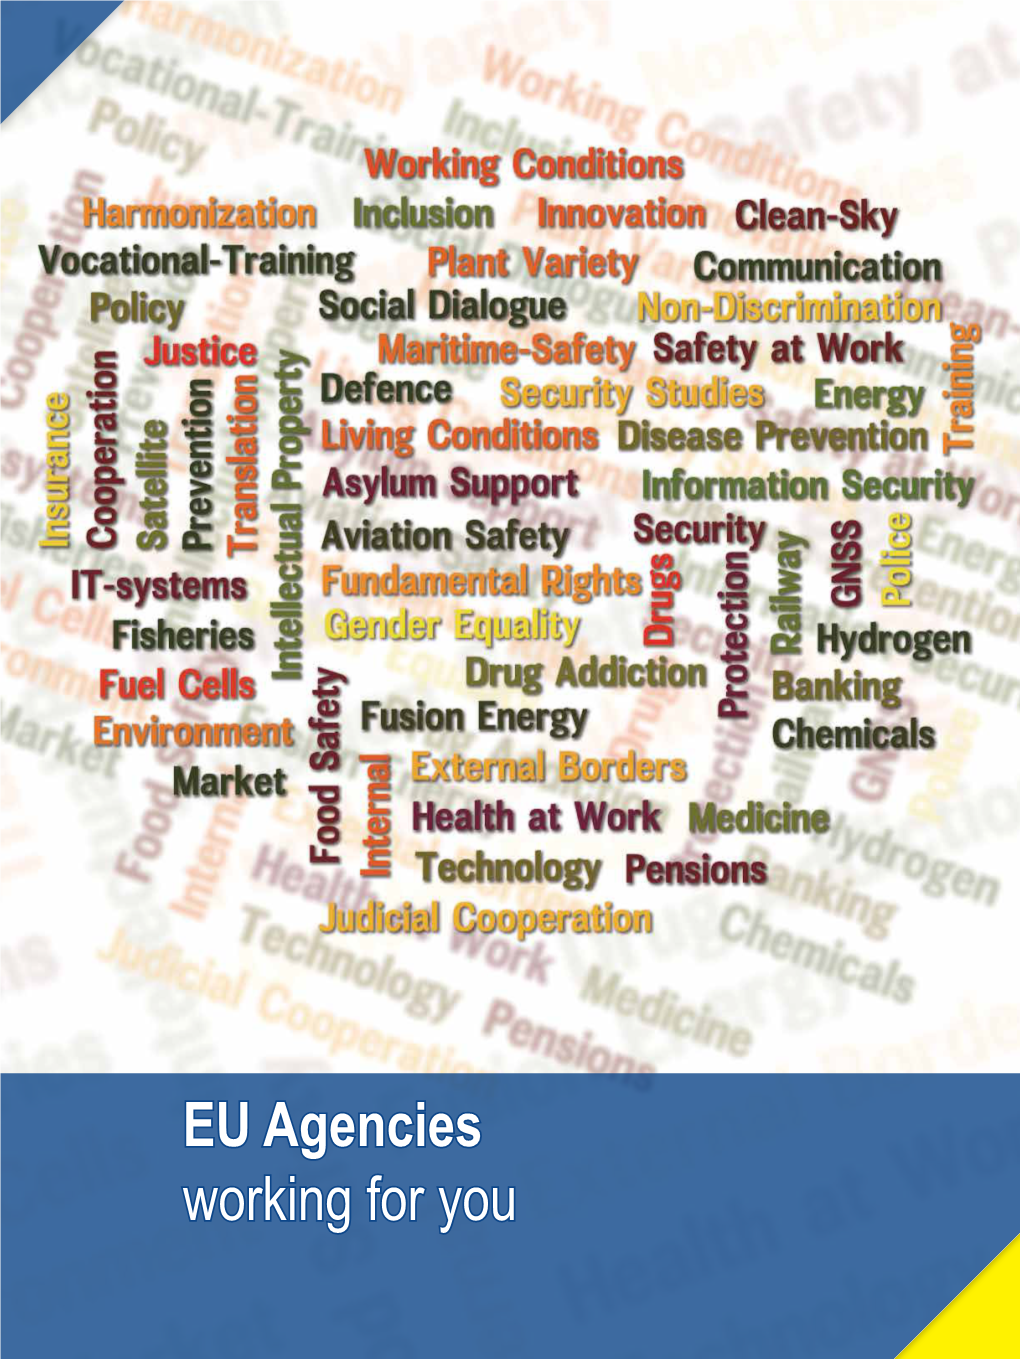 EU Agencies Working for You Europe Direct Is a Service to Help You Find Answers to Your Questions About the European Union